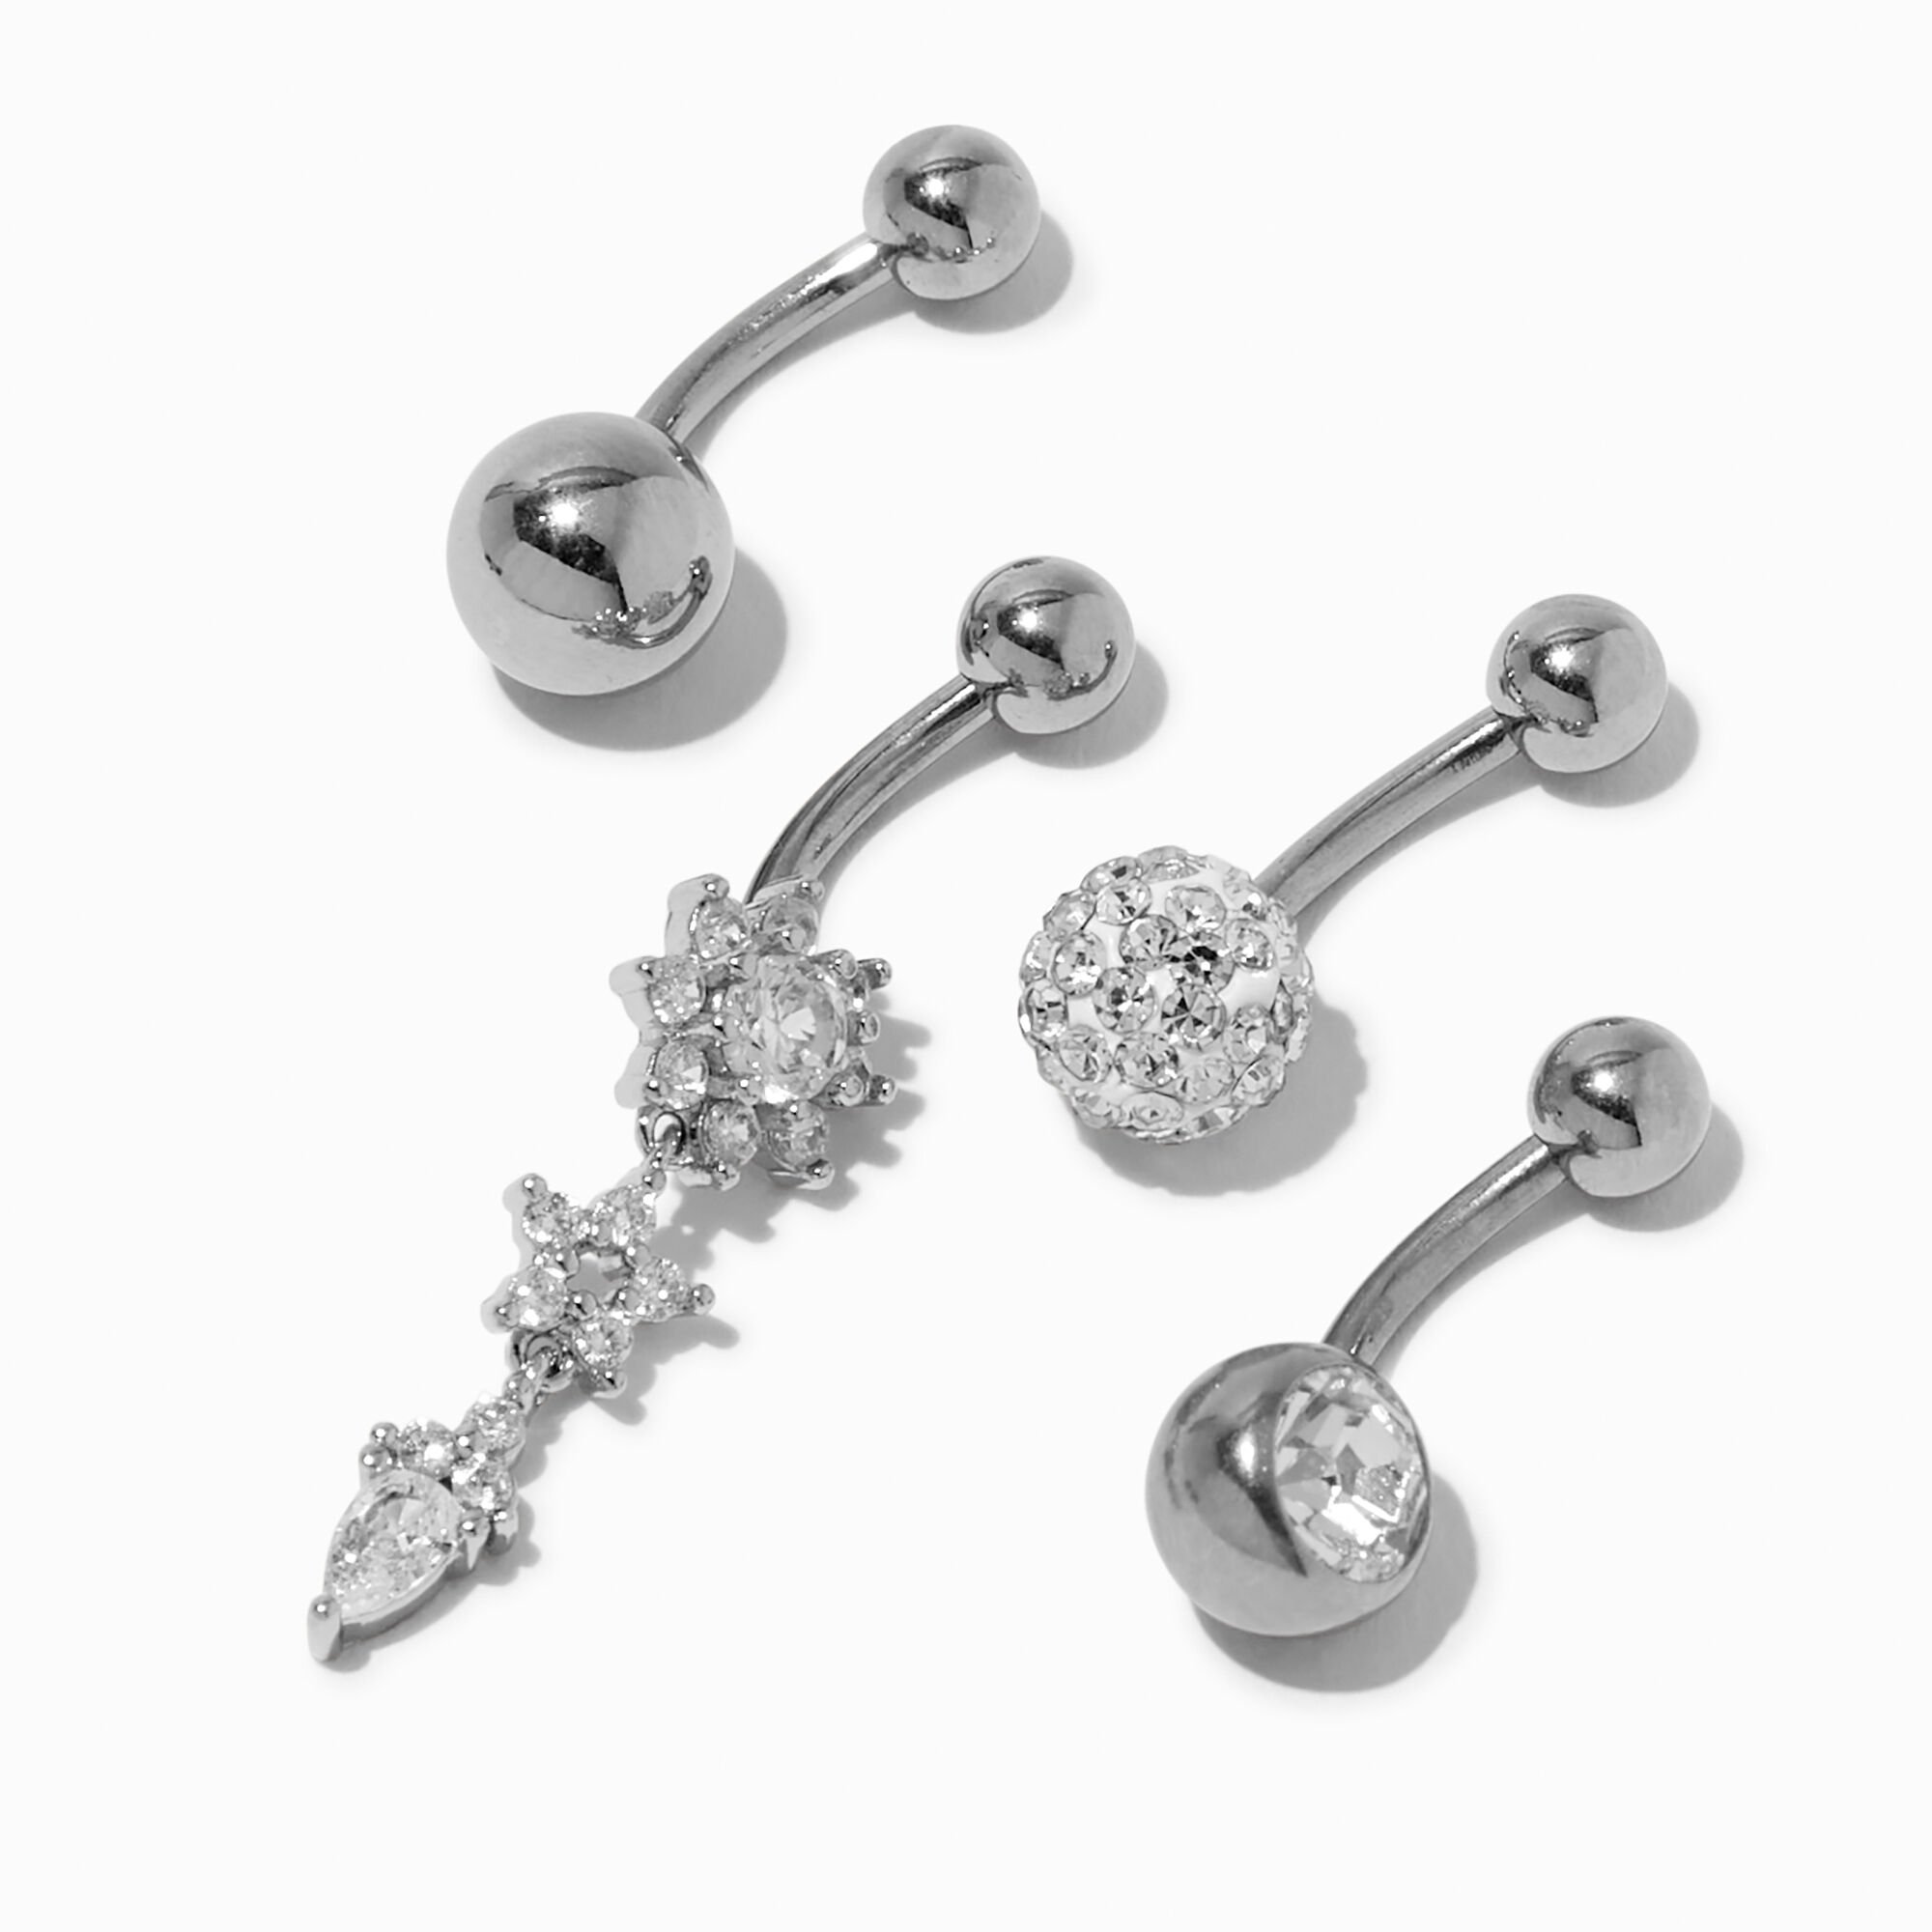 View Claires 14G Fireball Star Belly Rings 4 Pack Silver information